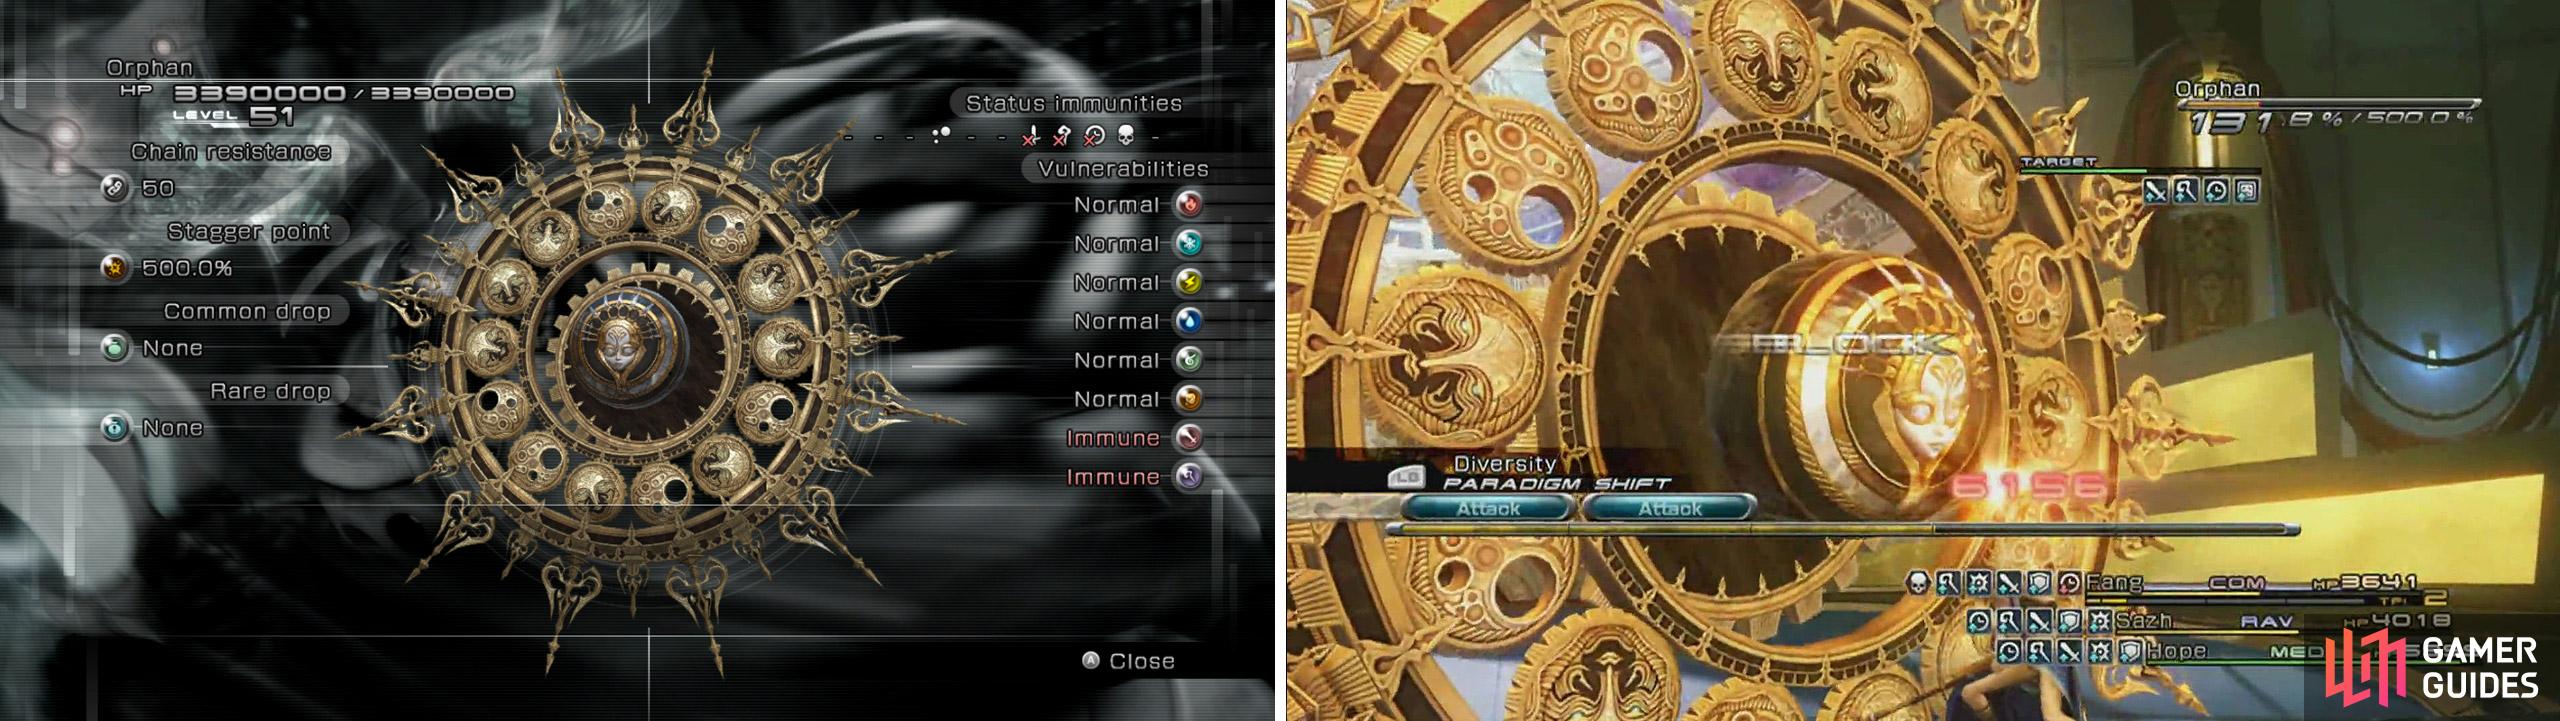 Orphan’s second form is the final boss of Final Fantasy XIII. Orphan’s true form is revealed after its shell is destroyed by the player party. Defeating Orphan completes the game.